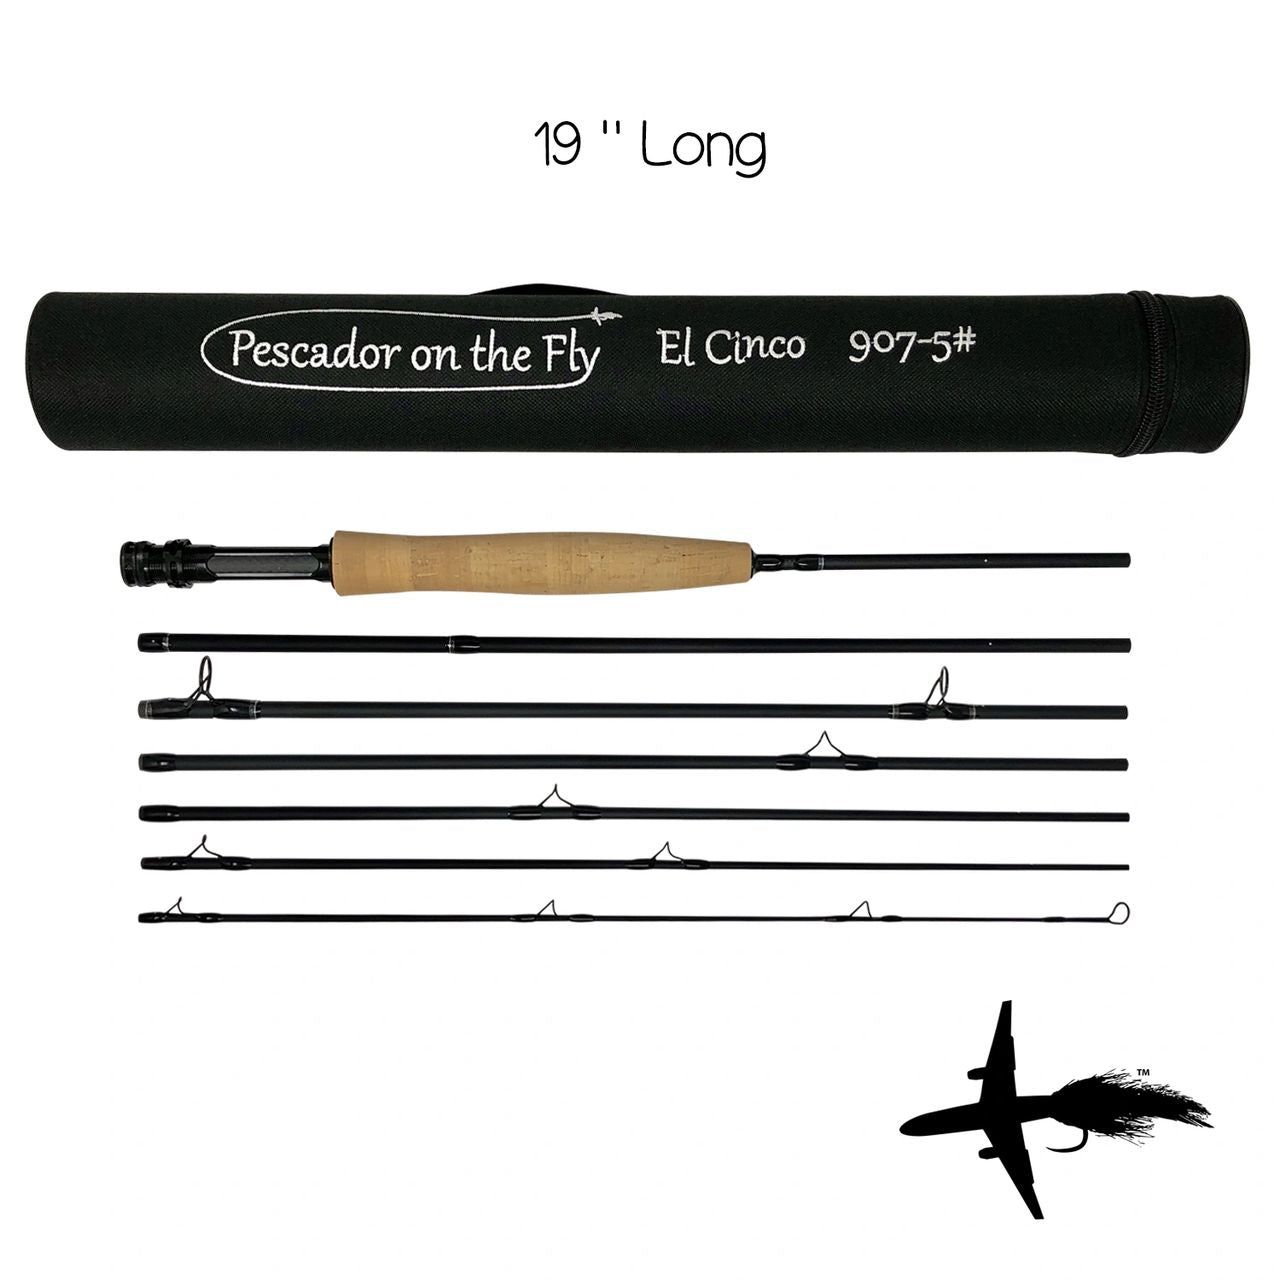 The Perfect Back Up Fly Rod